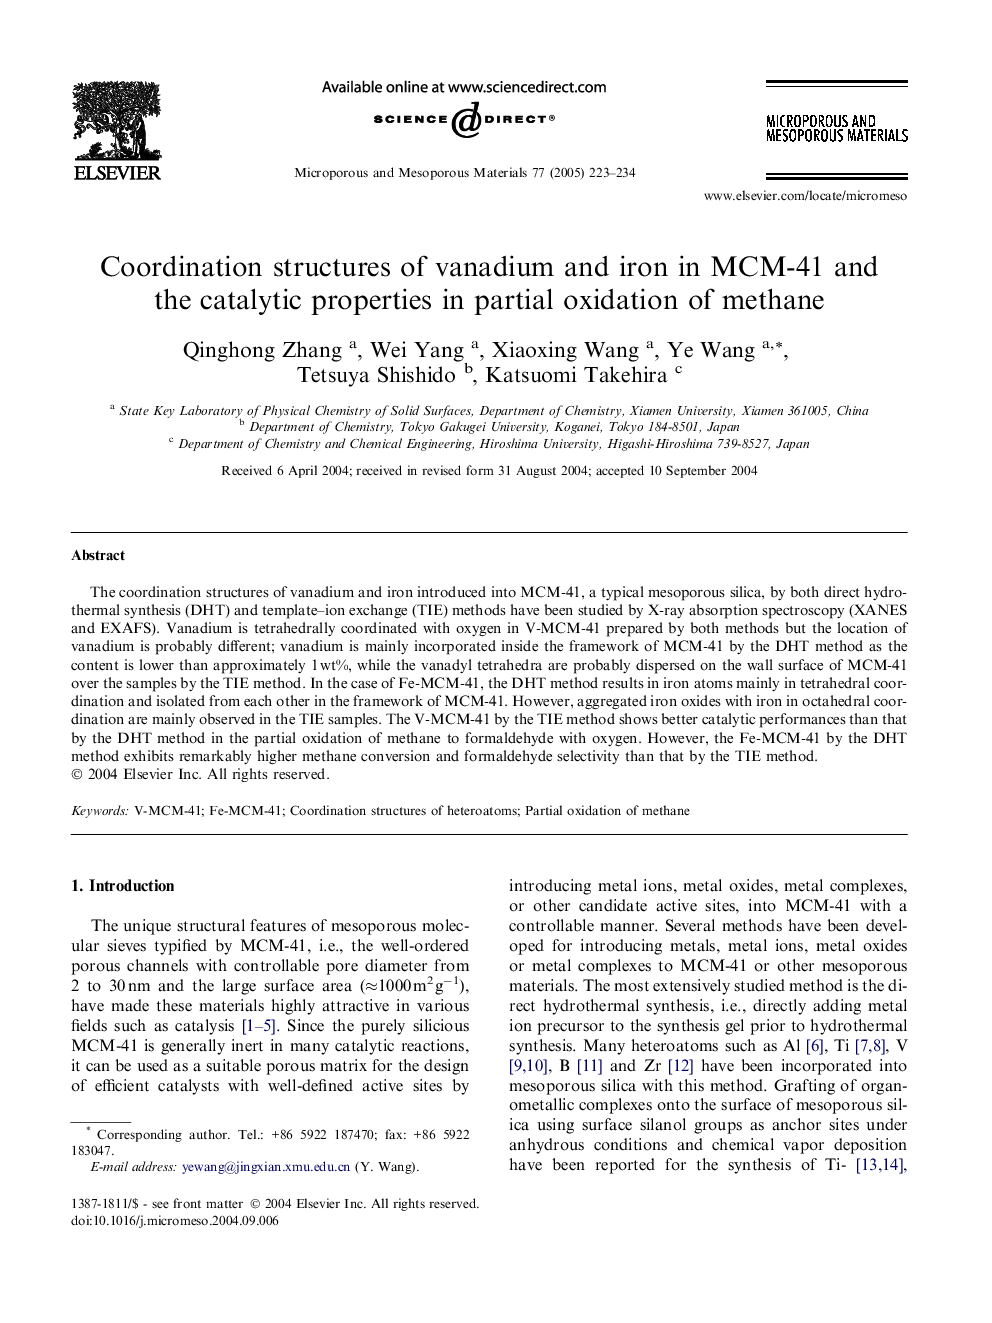 Coordination structures of vanadium and iron in MCM-41 and the catalytic properties in partial oxidation of methane